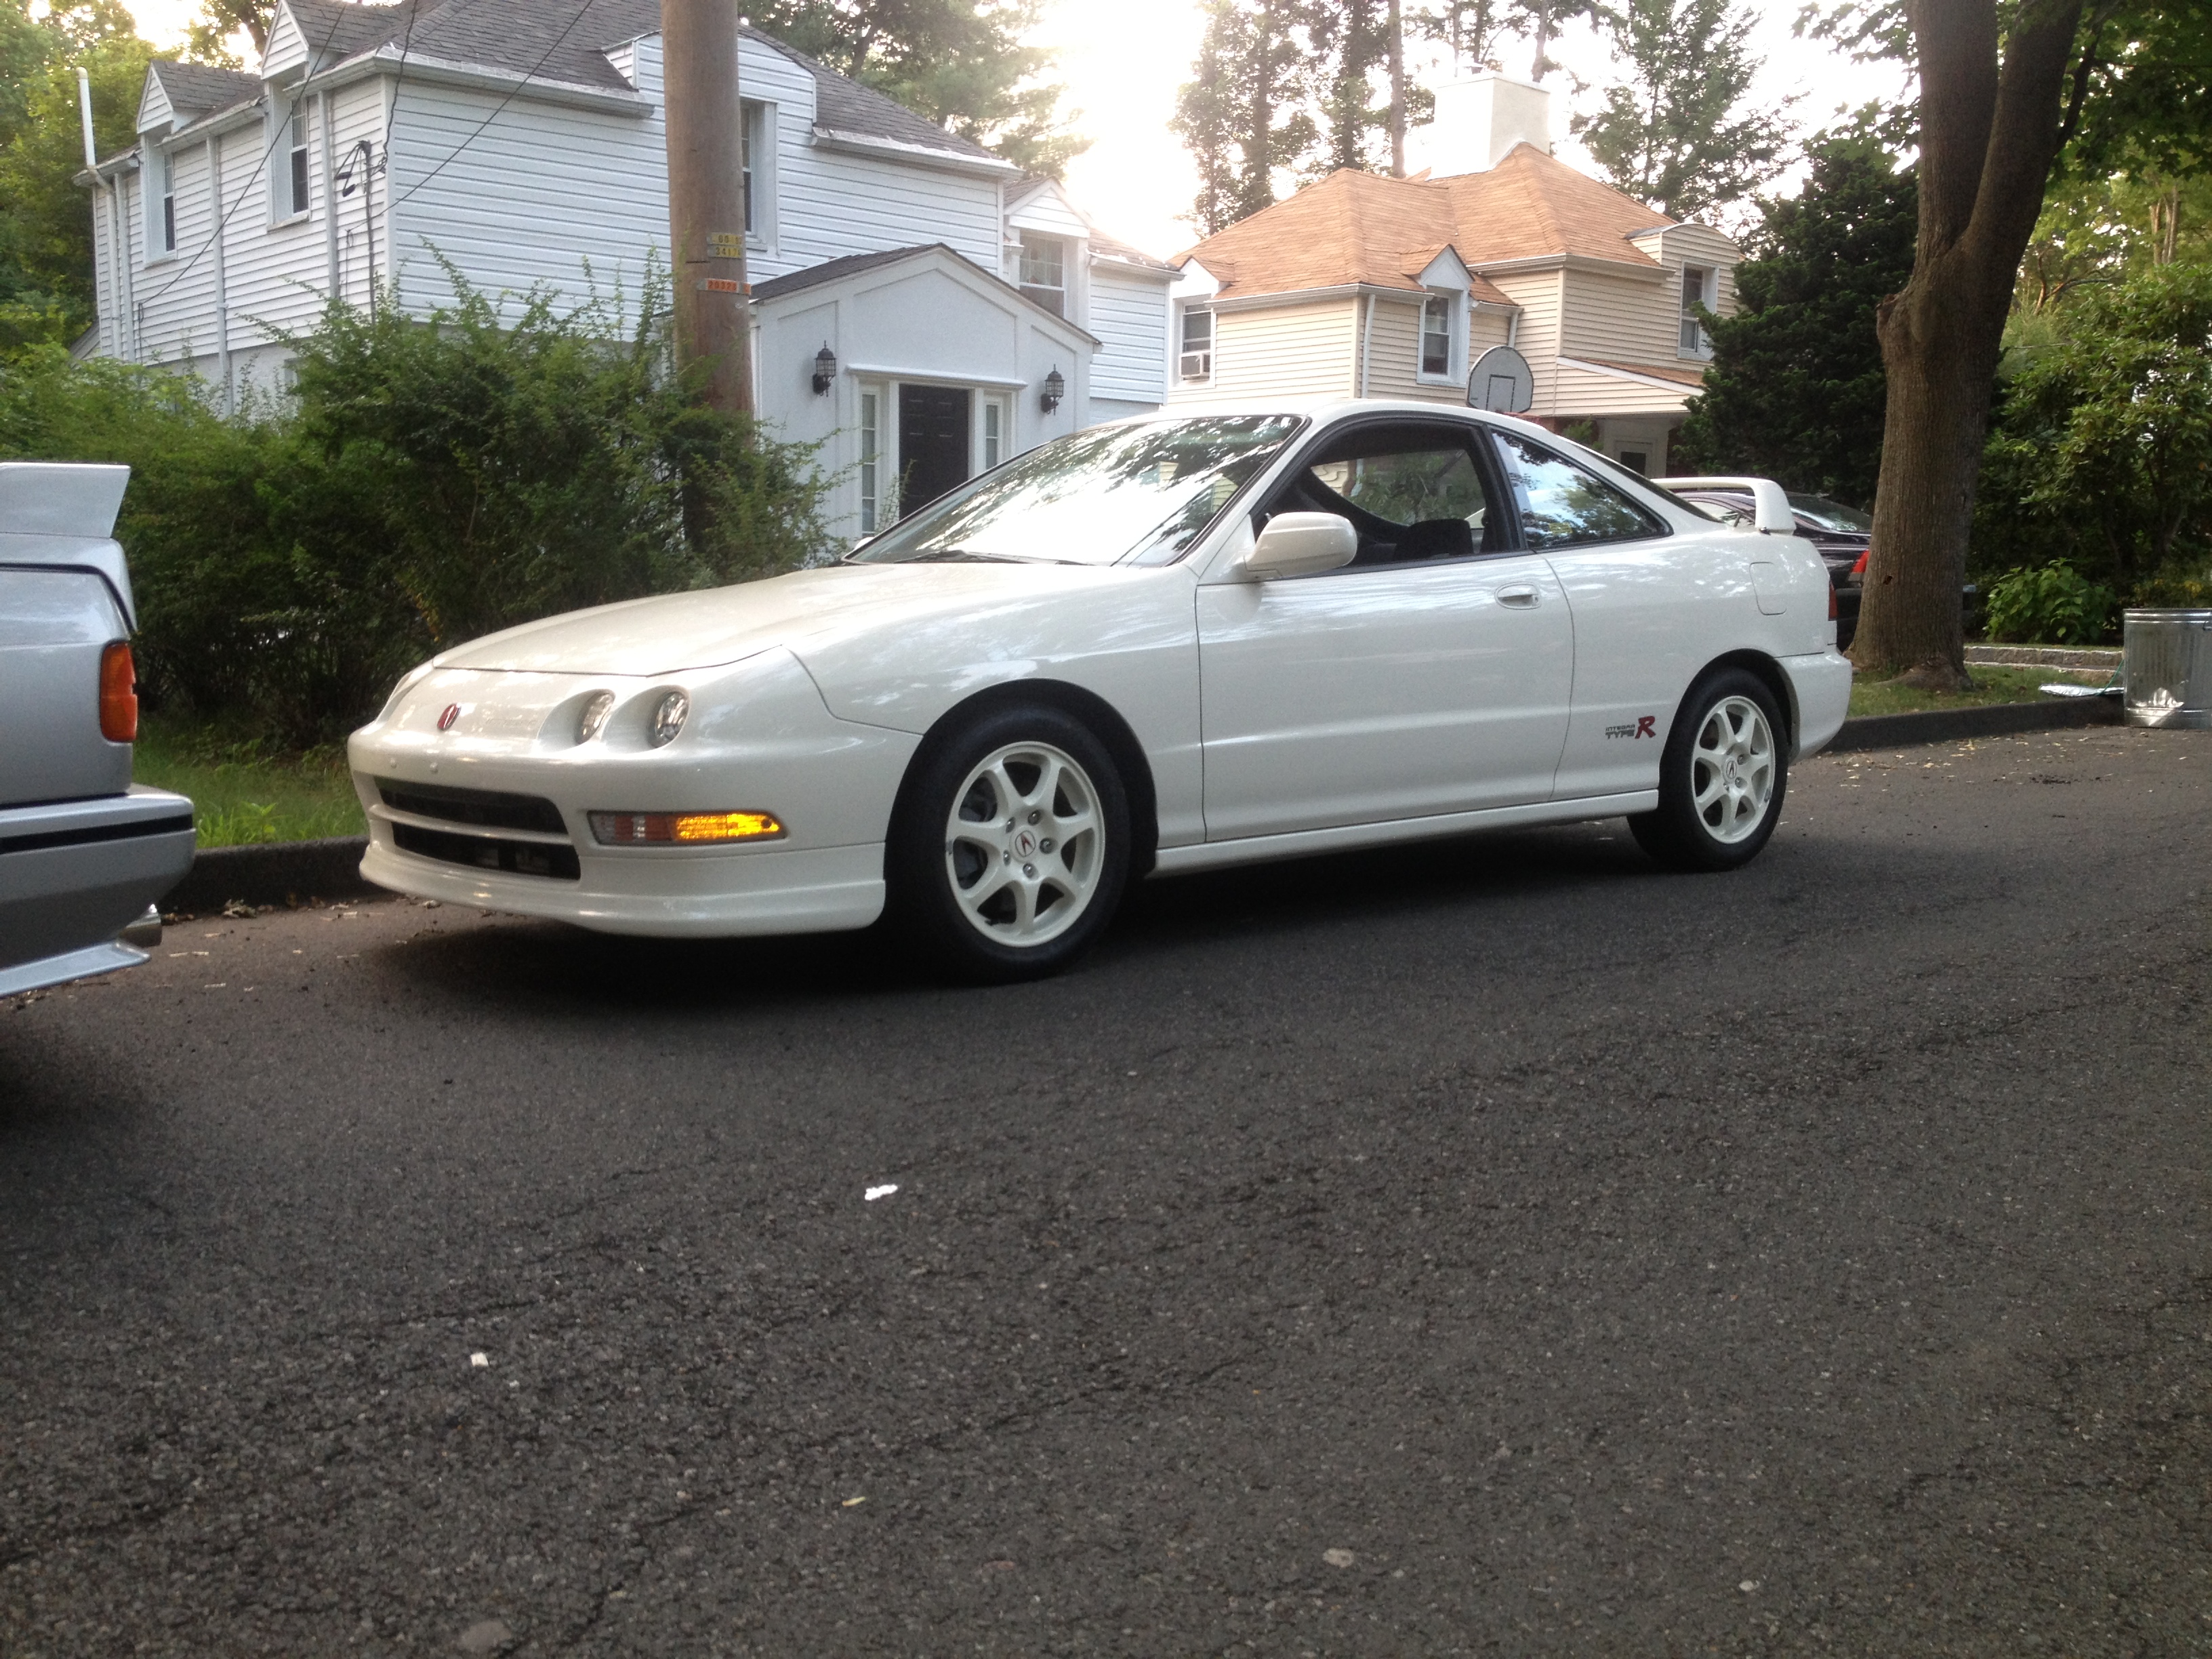 championship white 1997 Acura Integra Type-R parked on the sidewalk